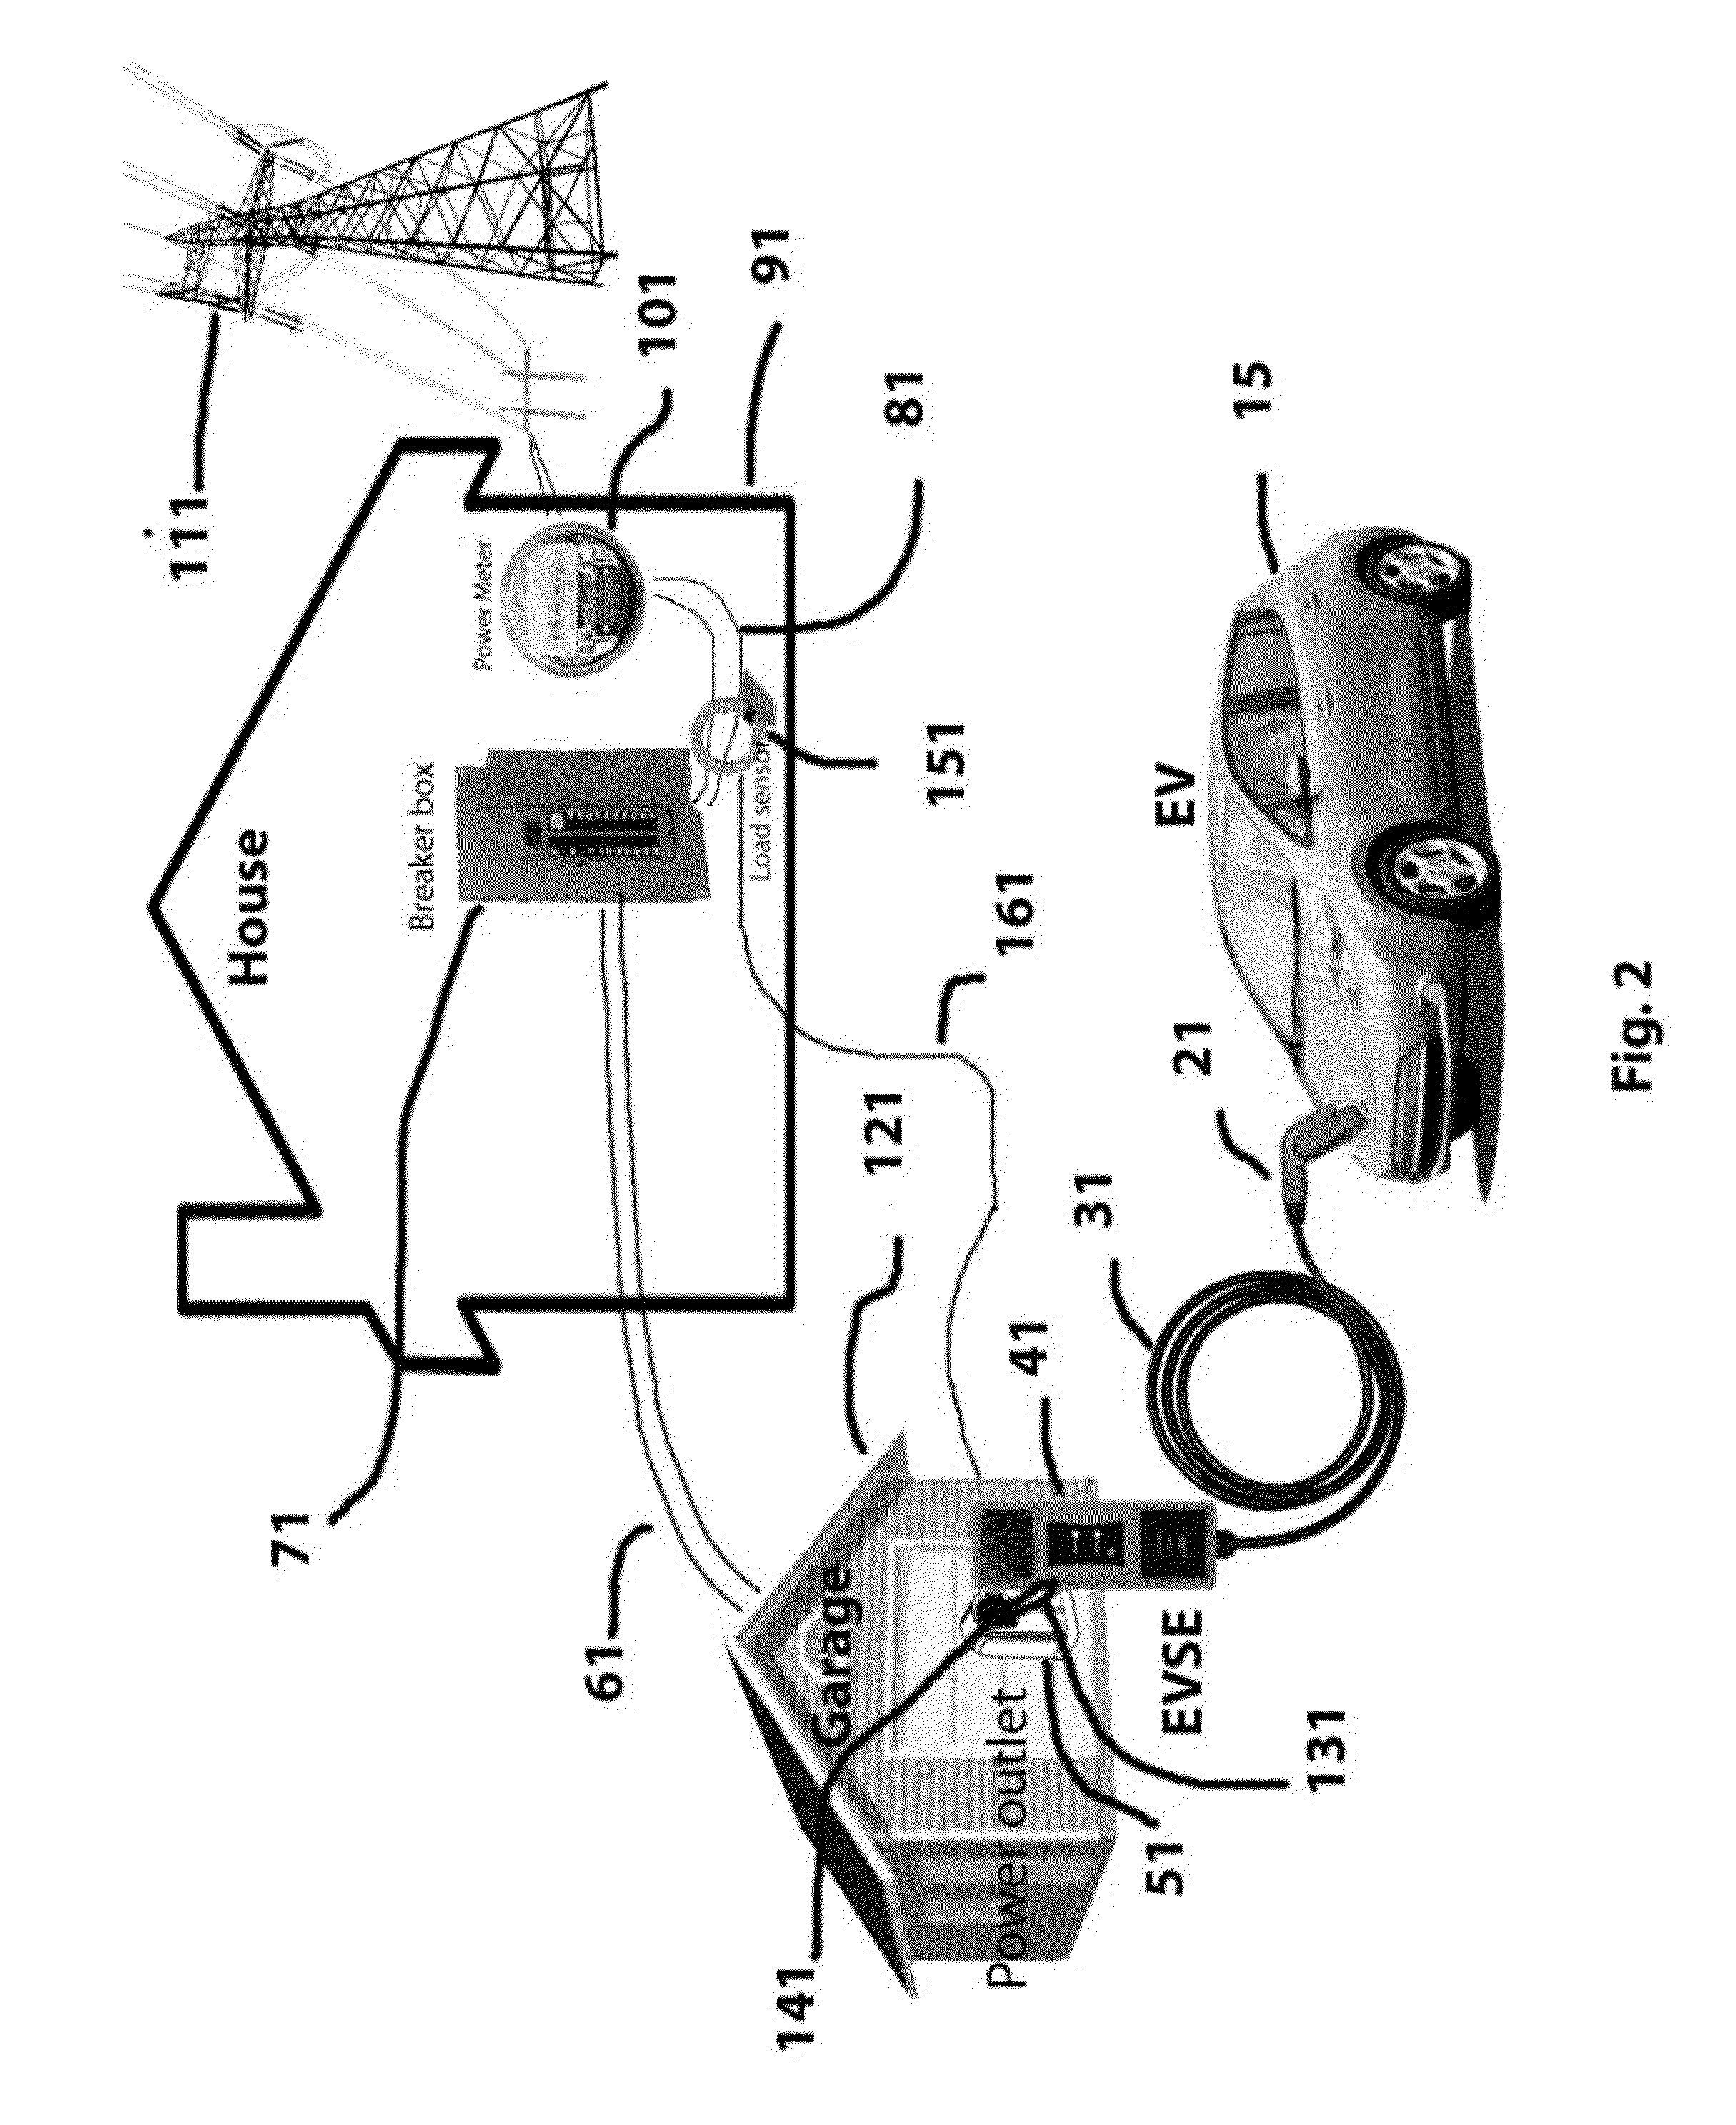 System and method for electric vehicle (EV) charging